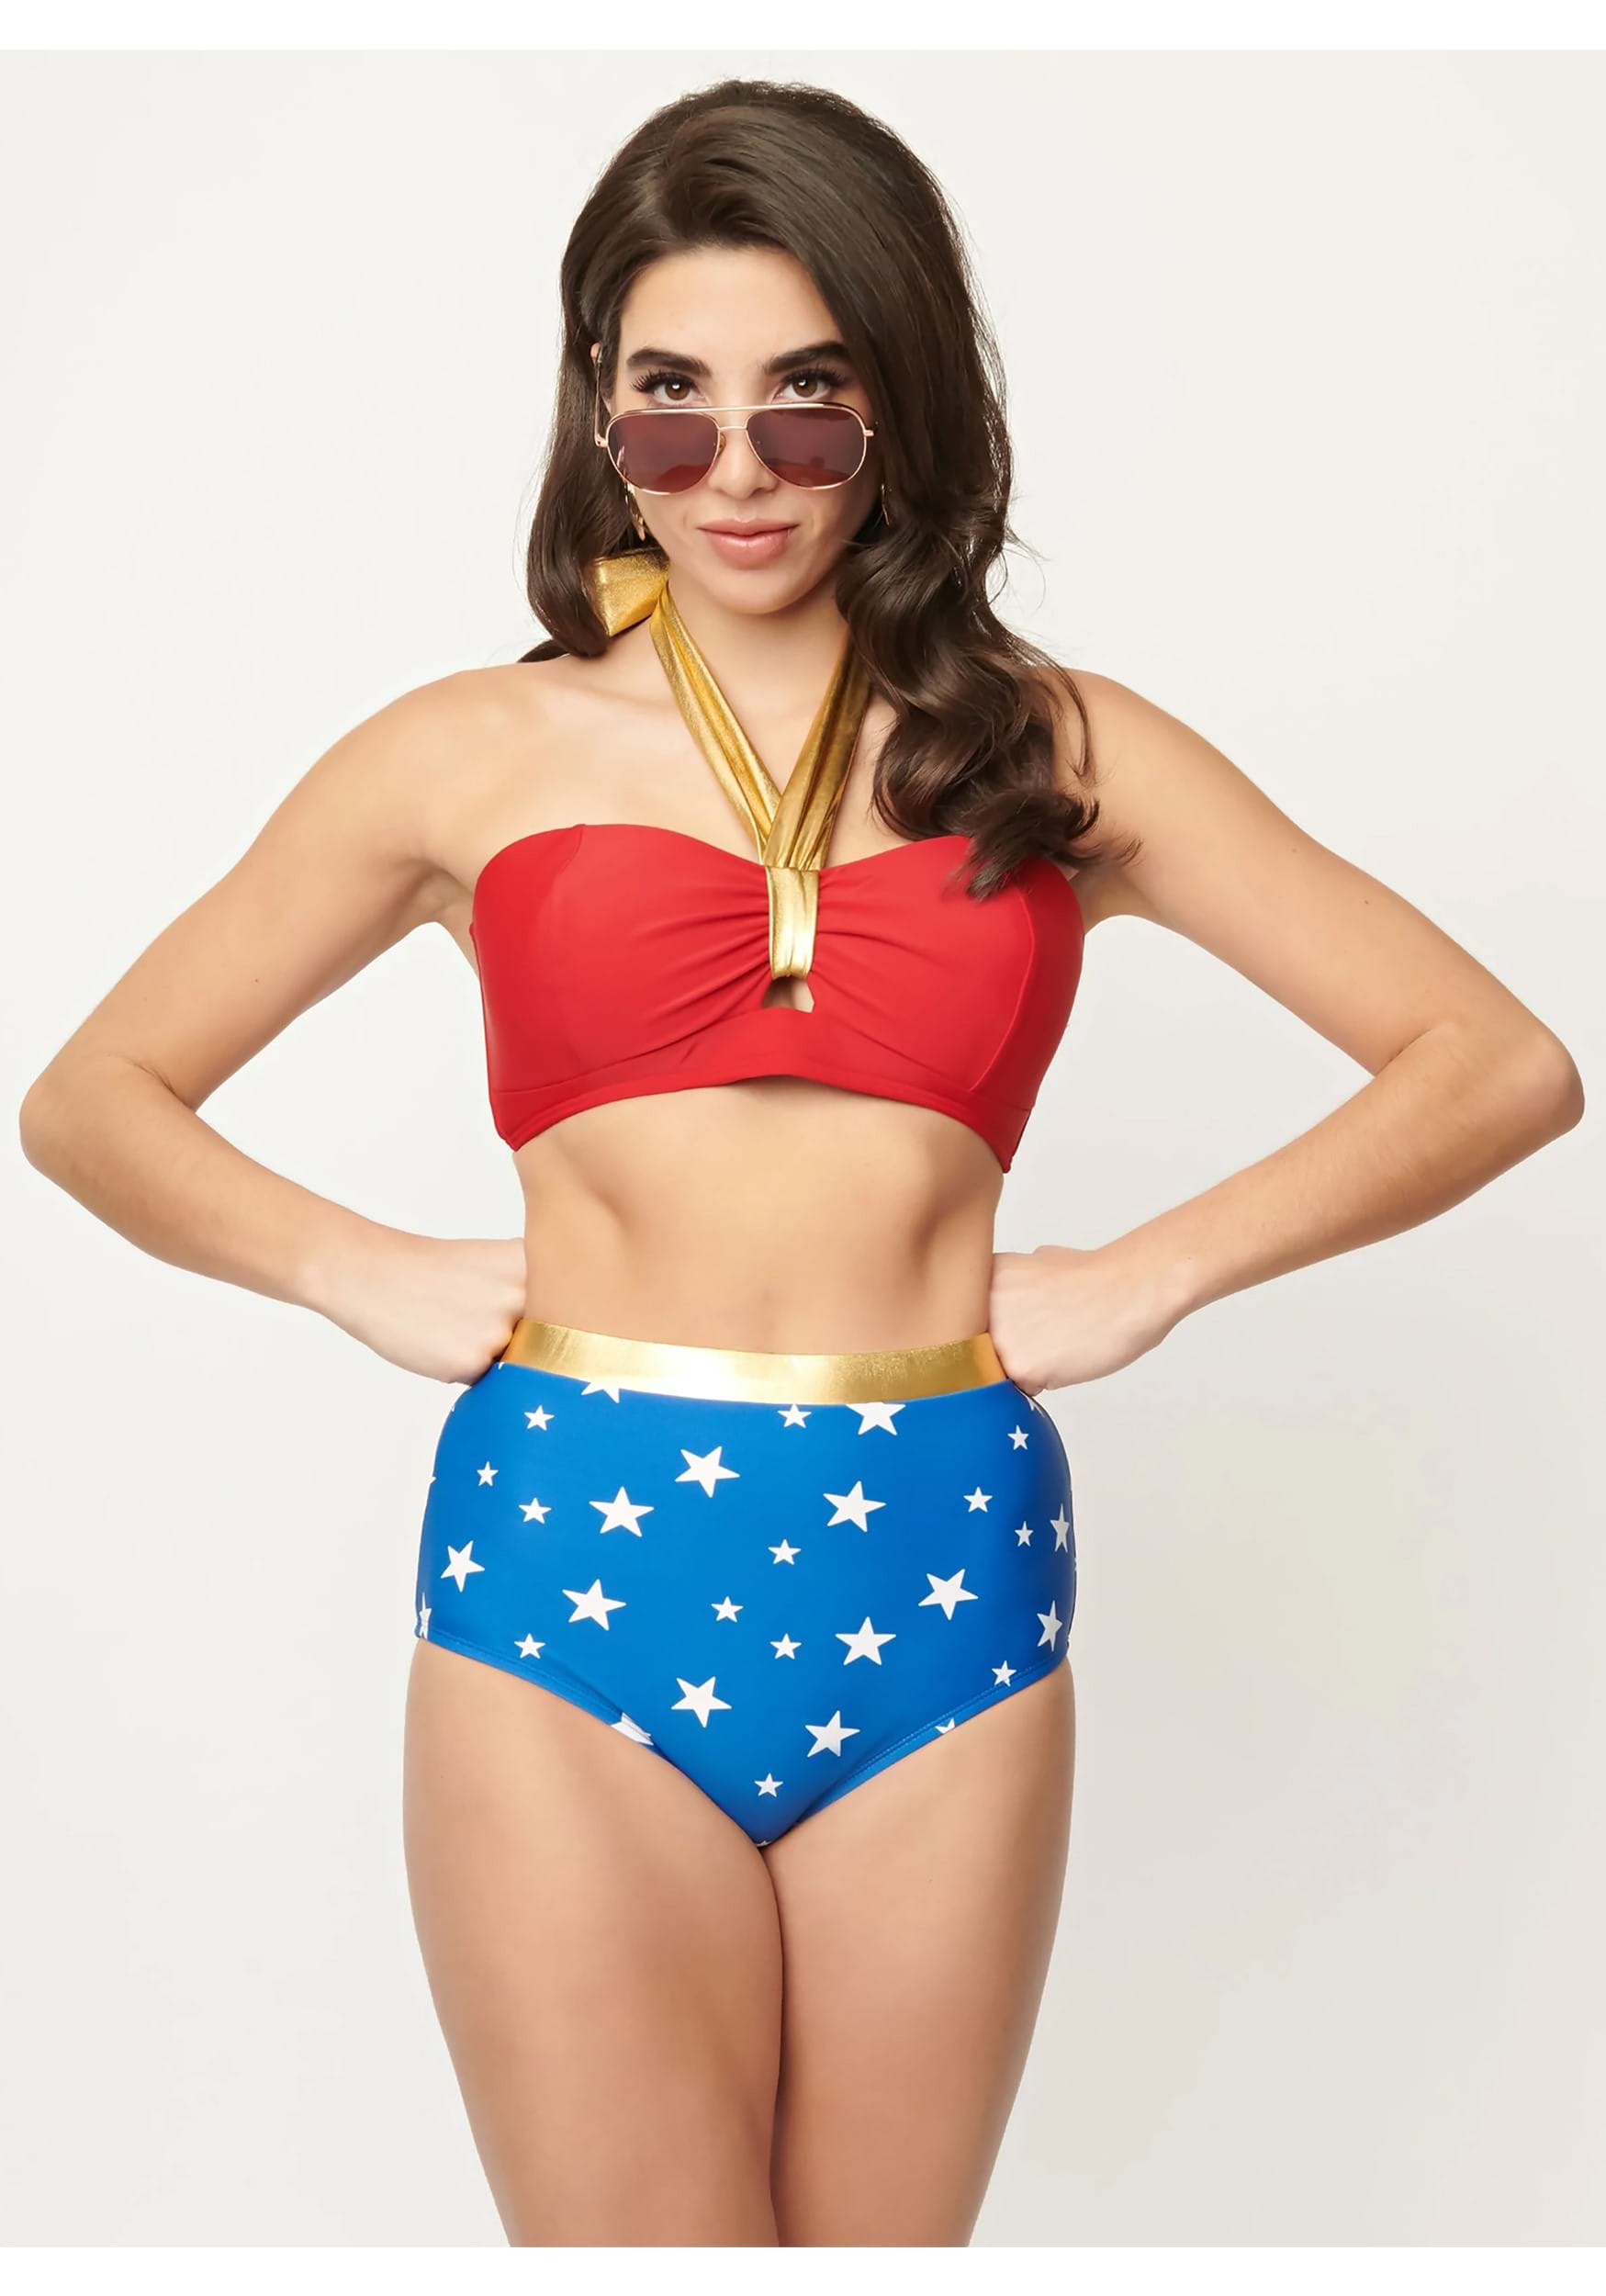 Wonder Woman DC Comics Lace Up Backless Womens Bathing Suit Monokini One  Piece - Fearless Apparel